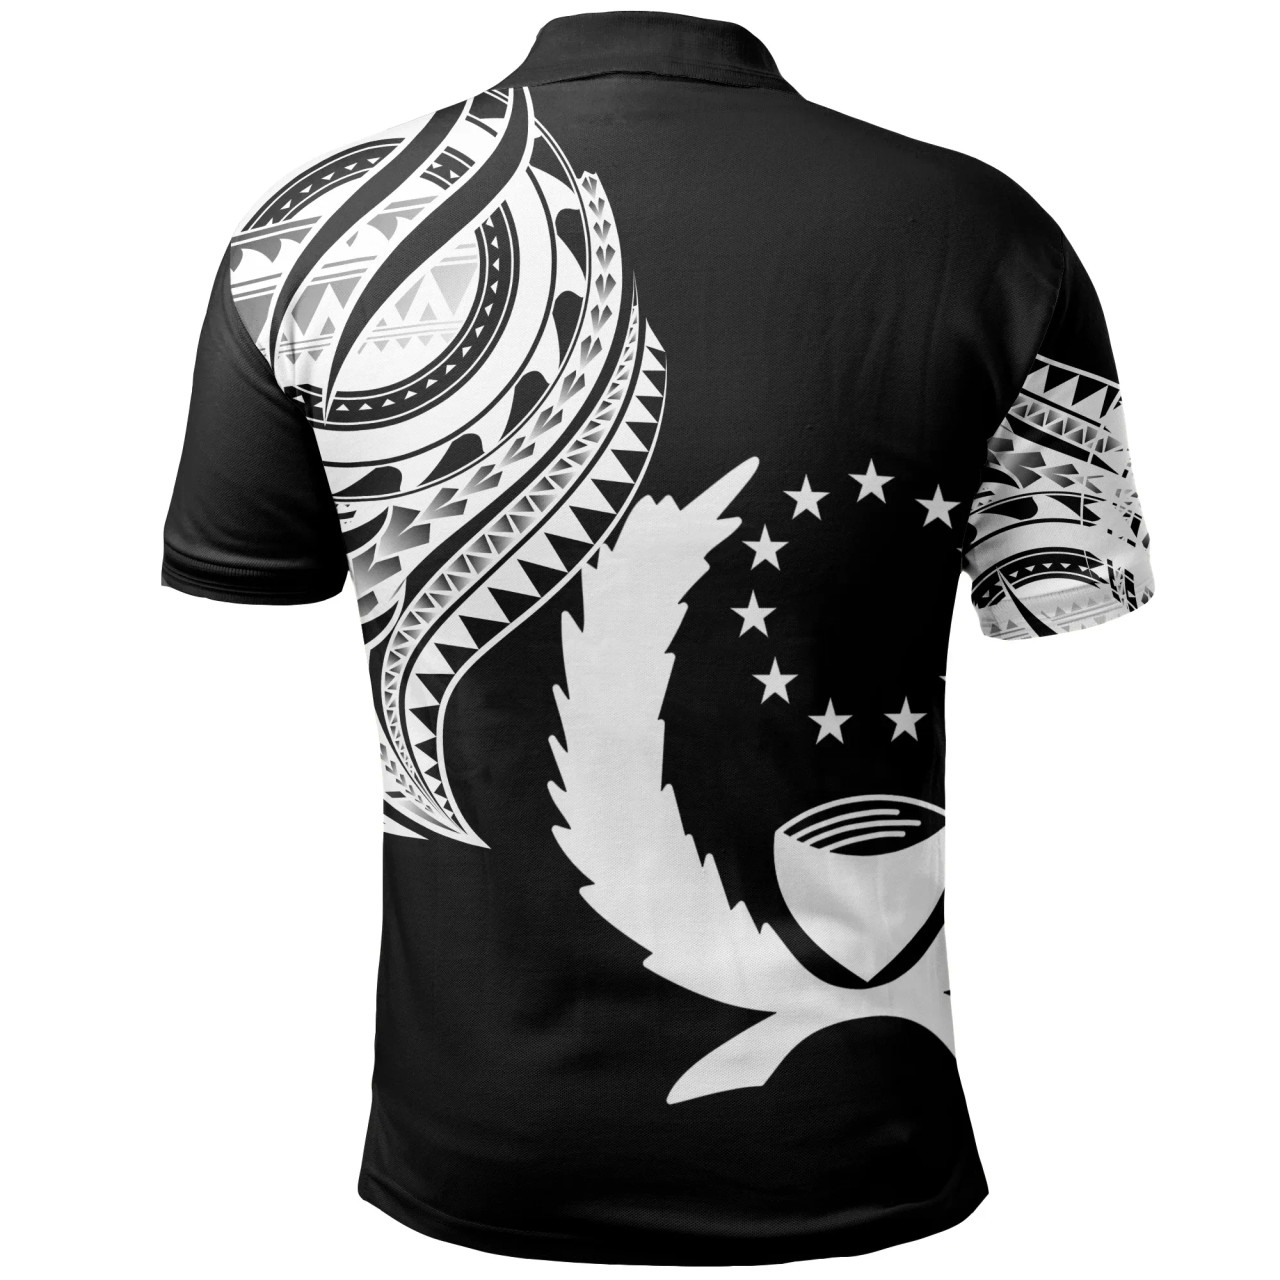 Pohnpei State Polo Shirt - Pohnpei State Tatau White Patterns With Coat Of Arms 2